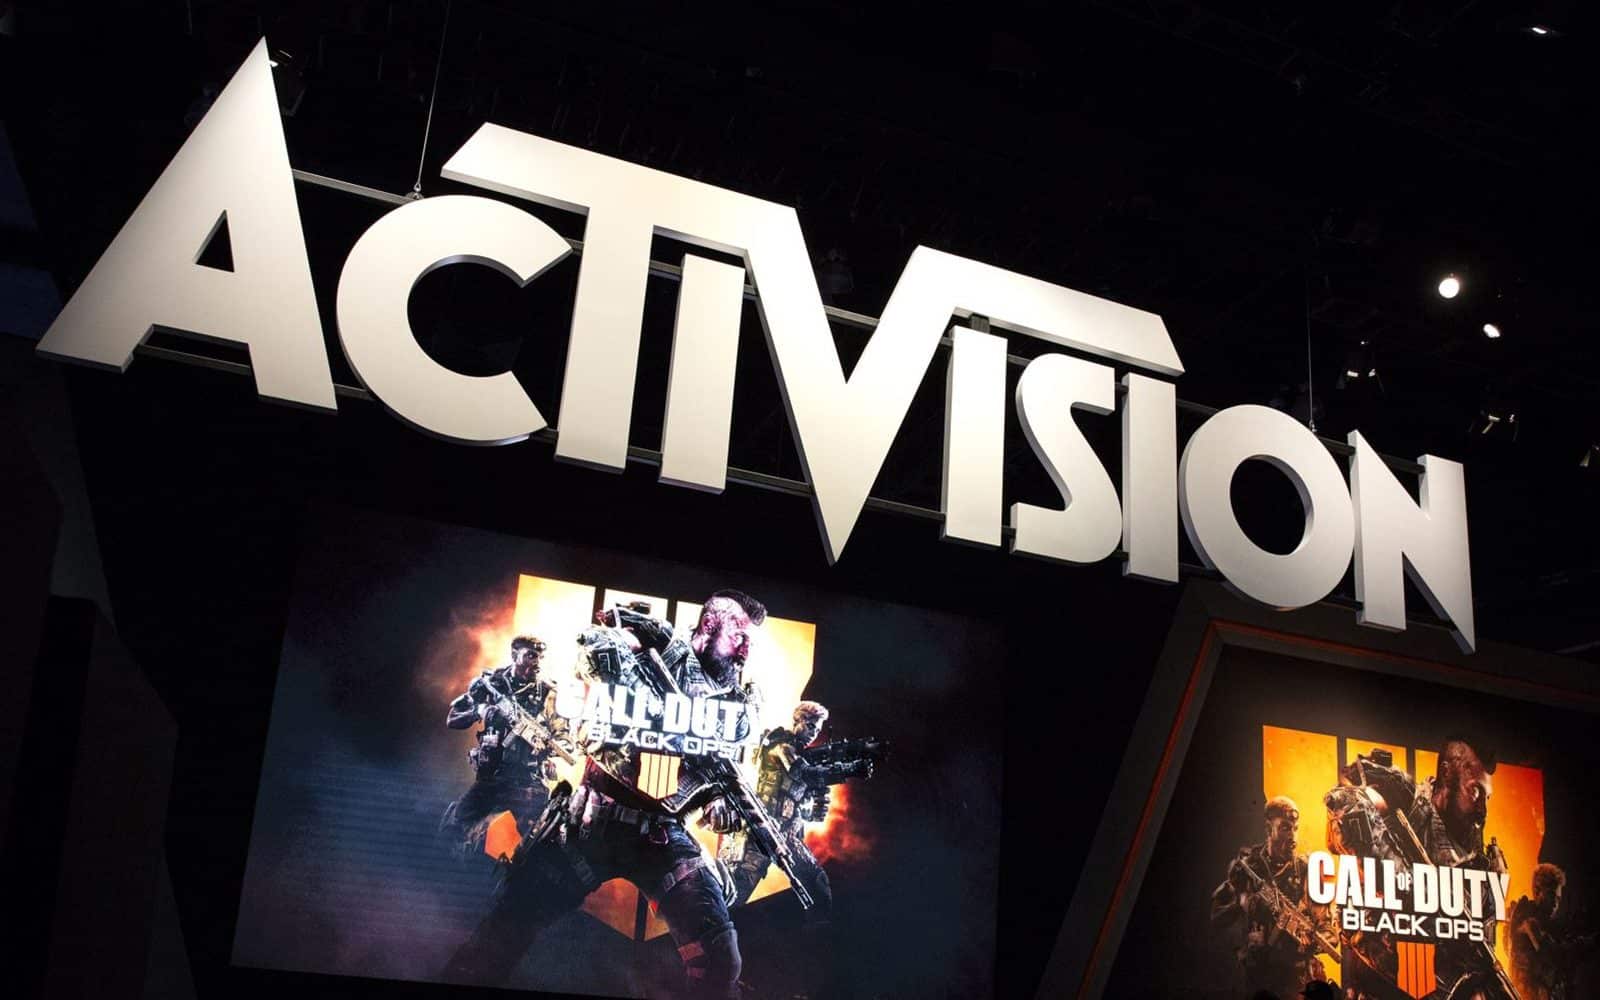 Microsoft Closes $69B Acquisition Of Activision Blizzard, Creating